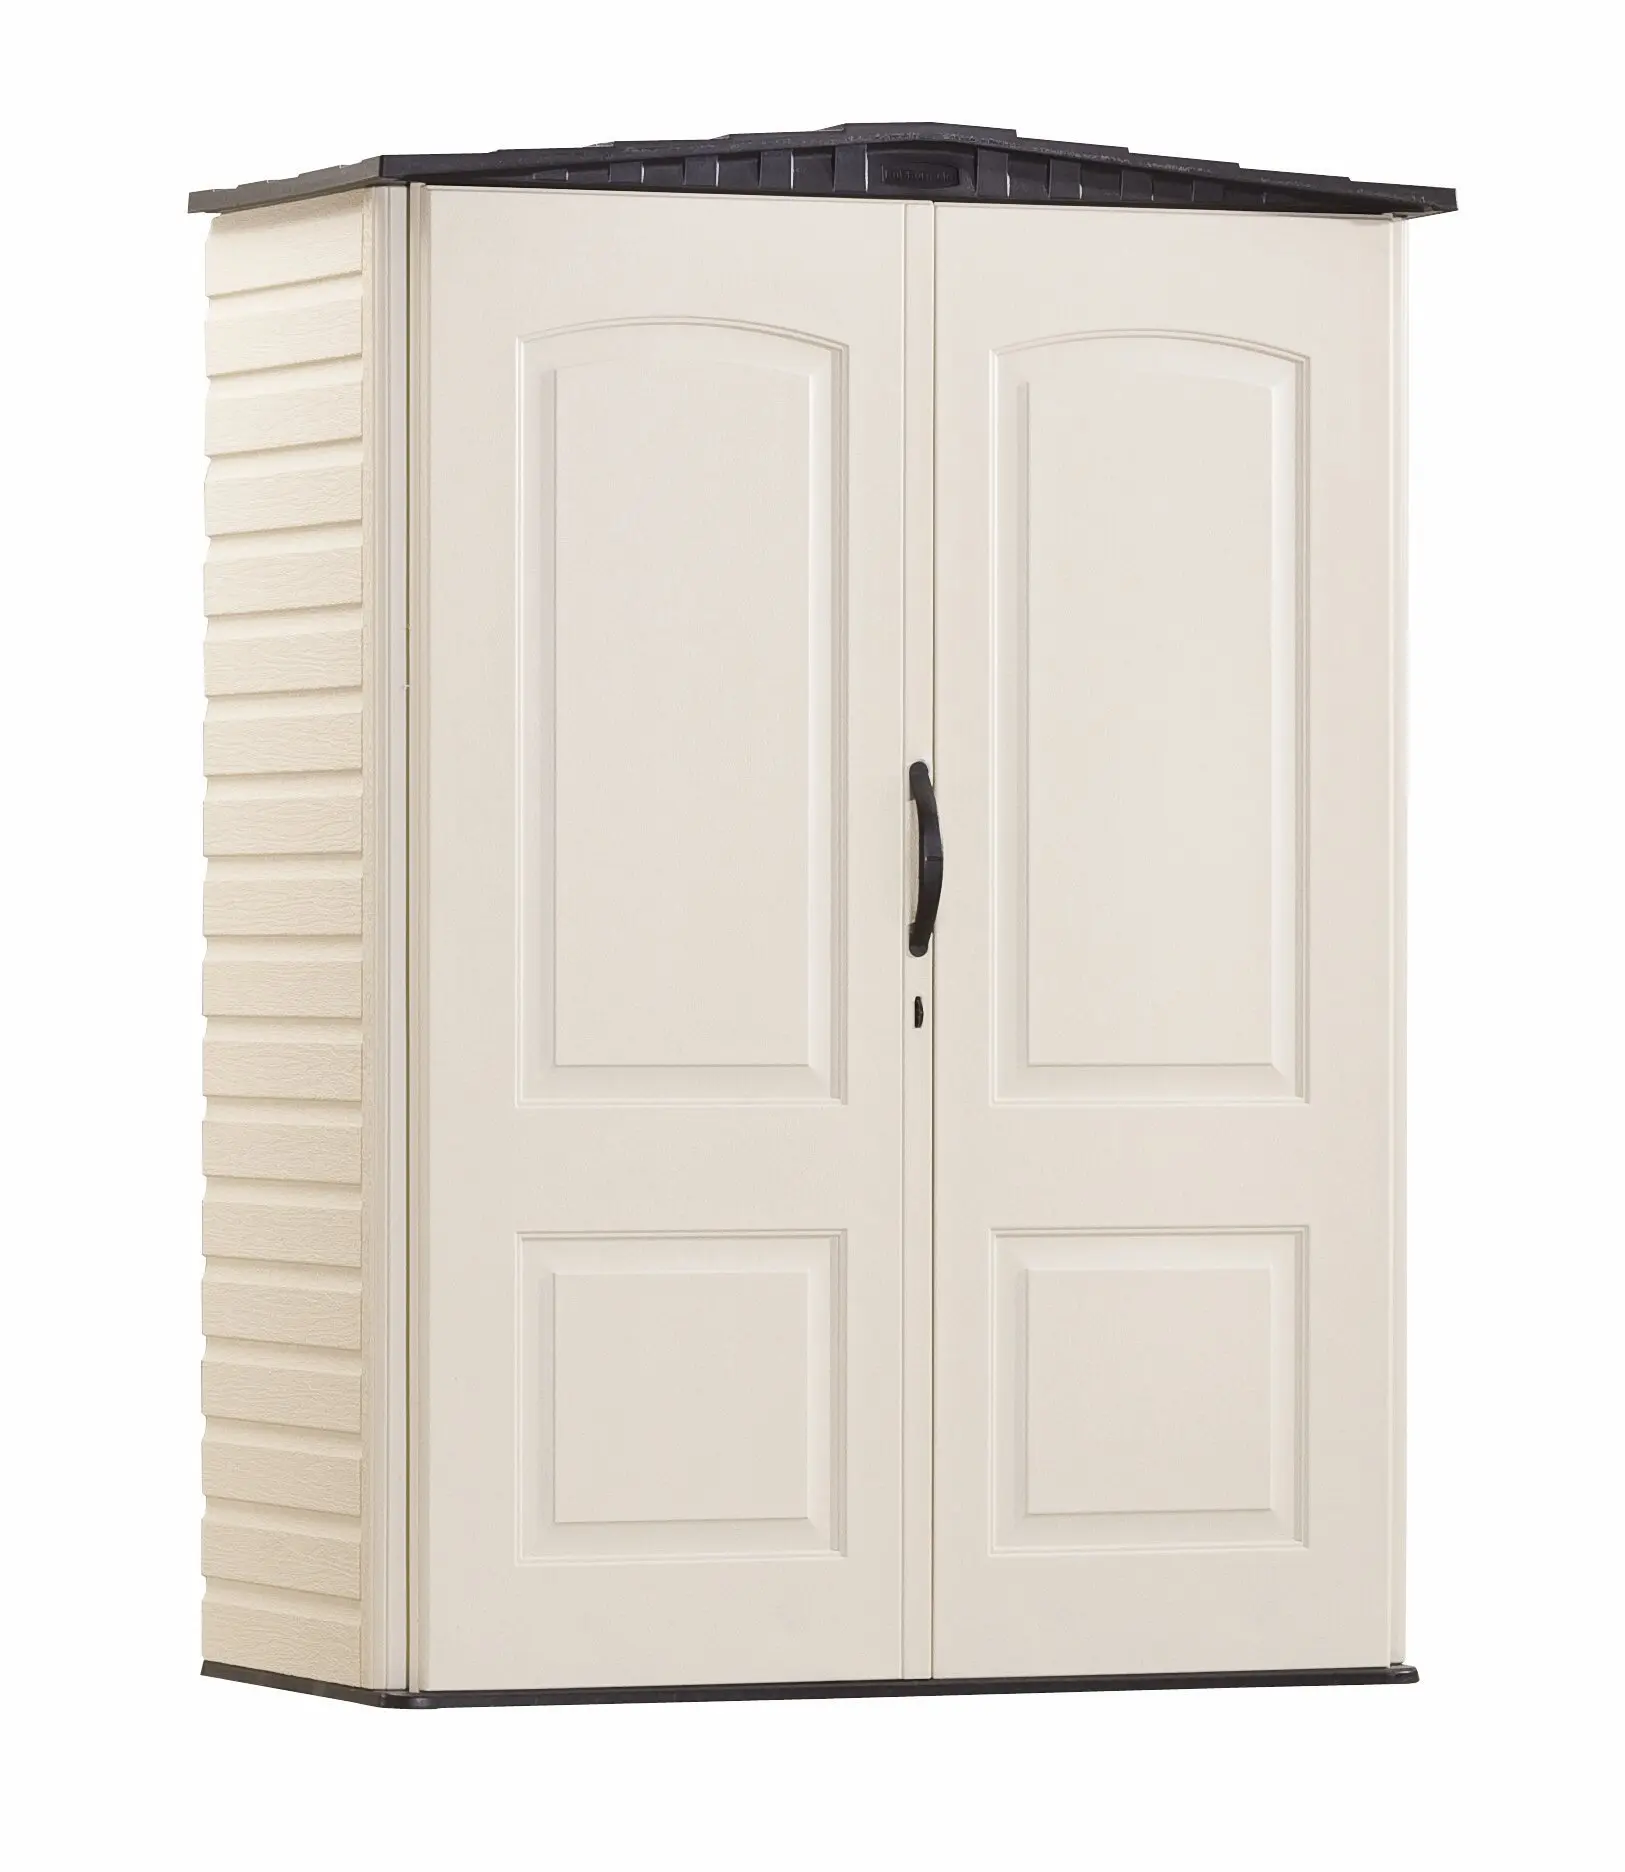 Cheap Rubbermaid Storage Shed Replacement Parts, find 